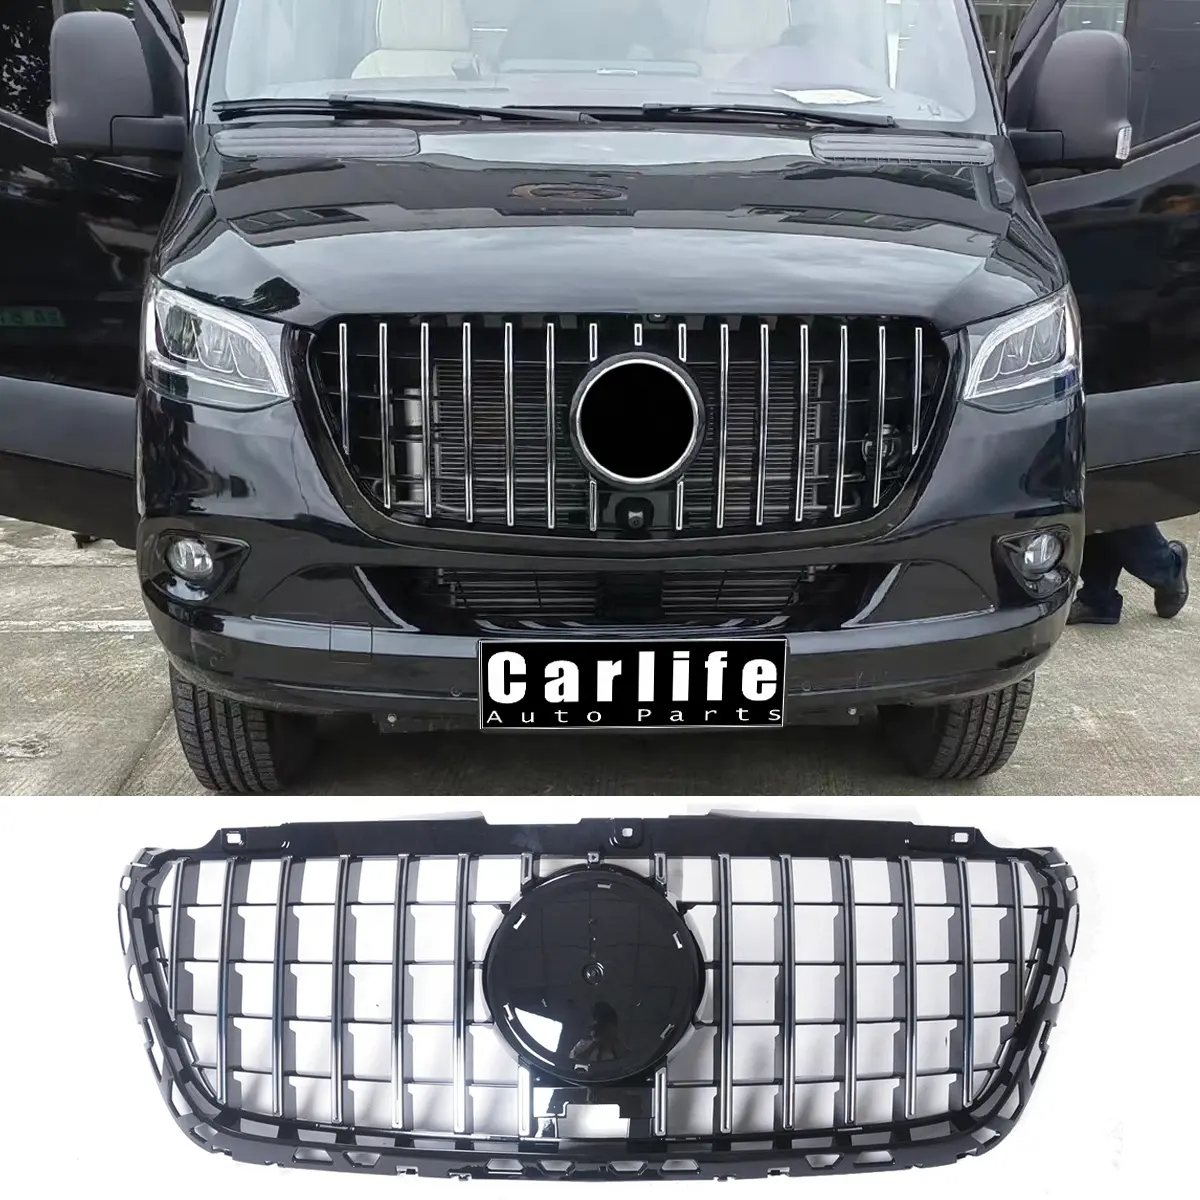 Sprinter W907 W910 for Mercedes benz Sprinter 2018 2019 2020 2021 2022 2023 year facelift to GT grille look model abs parts